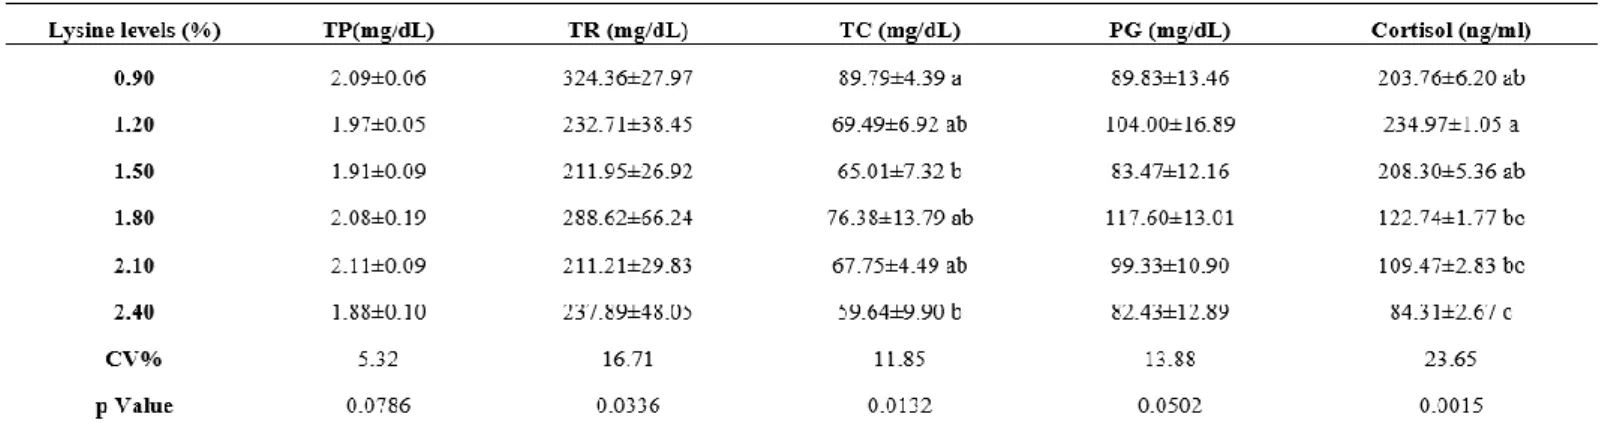 Table 6. Plasma biochemical parameters: total protein (TP), triglycerides (TR), total cholesterol (TC),  plasma glucose (PG) and plasma cortisol of juvenile tambaqui, Colossoma macropomum, subjected to  different lysine dietary levels